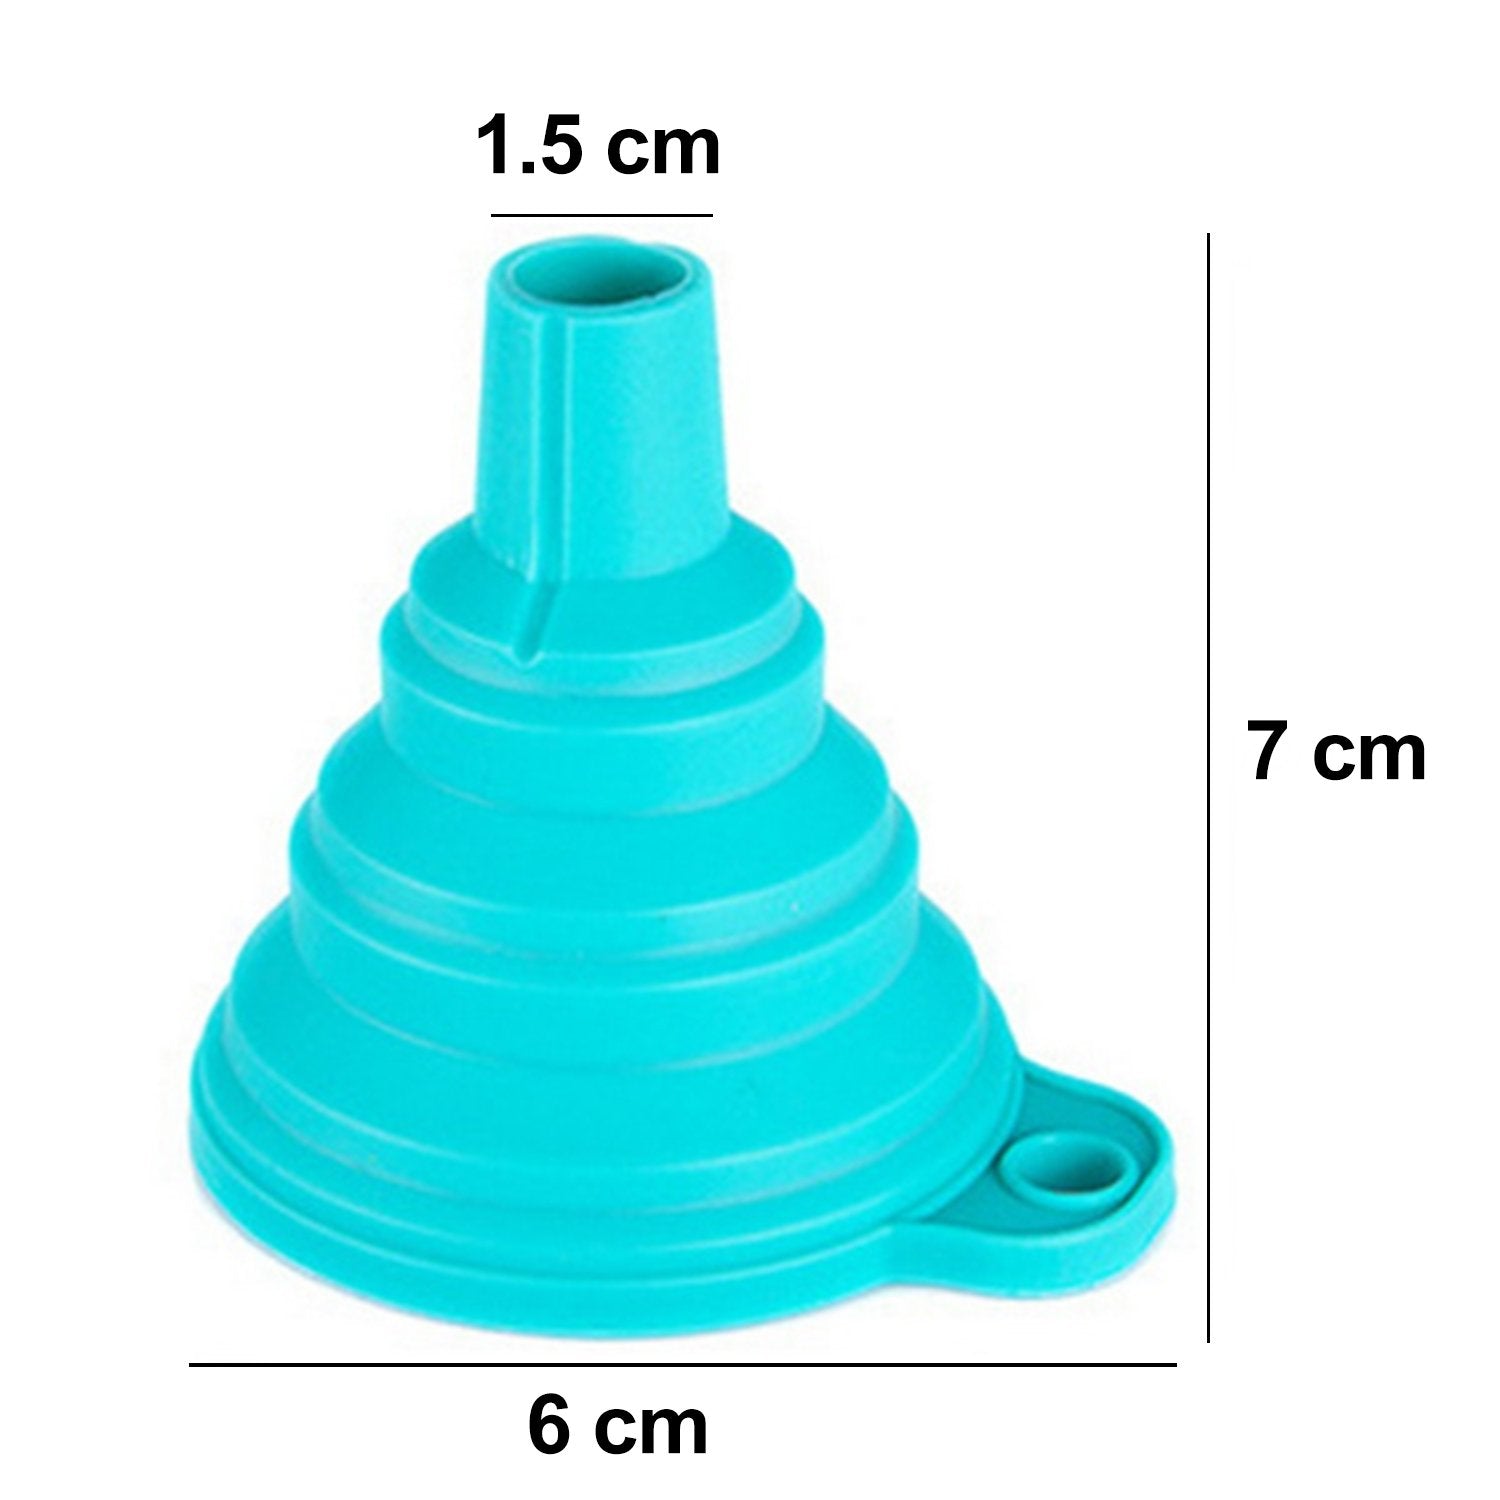 4677 Silicone Funnel for Kitchen Use Oil Pouring Sauce Water Juice 